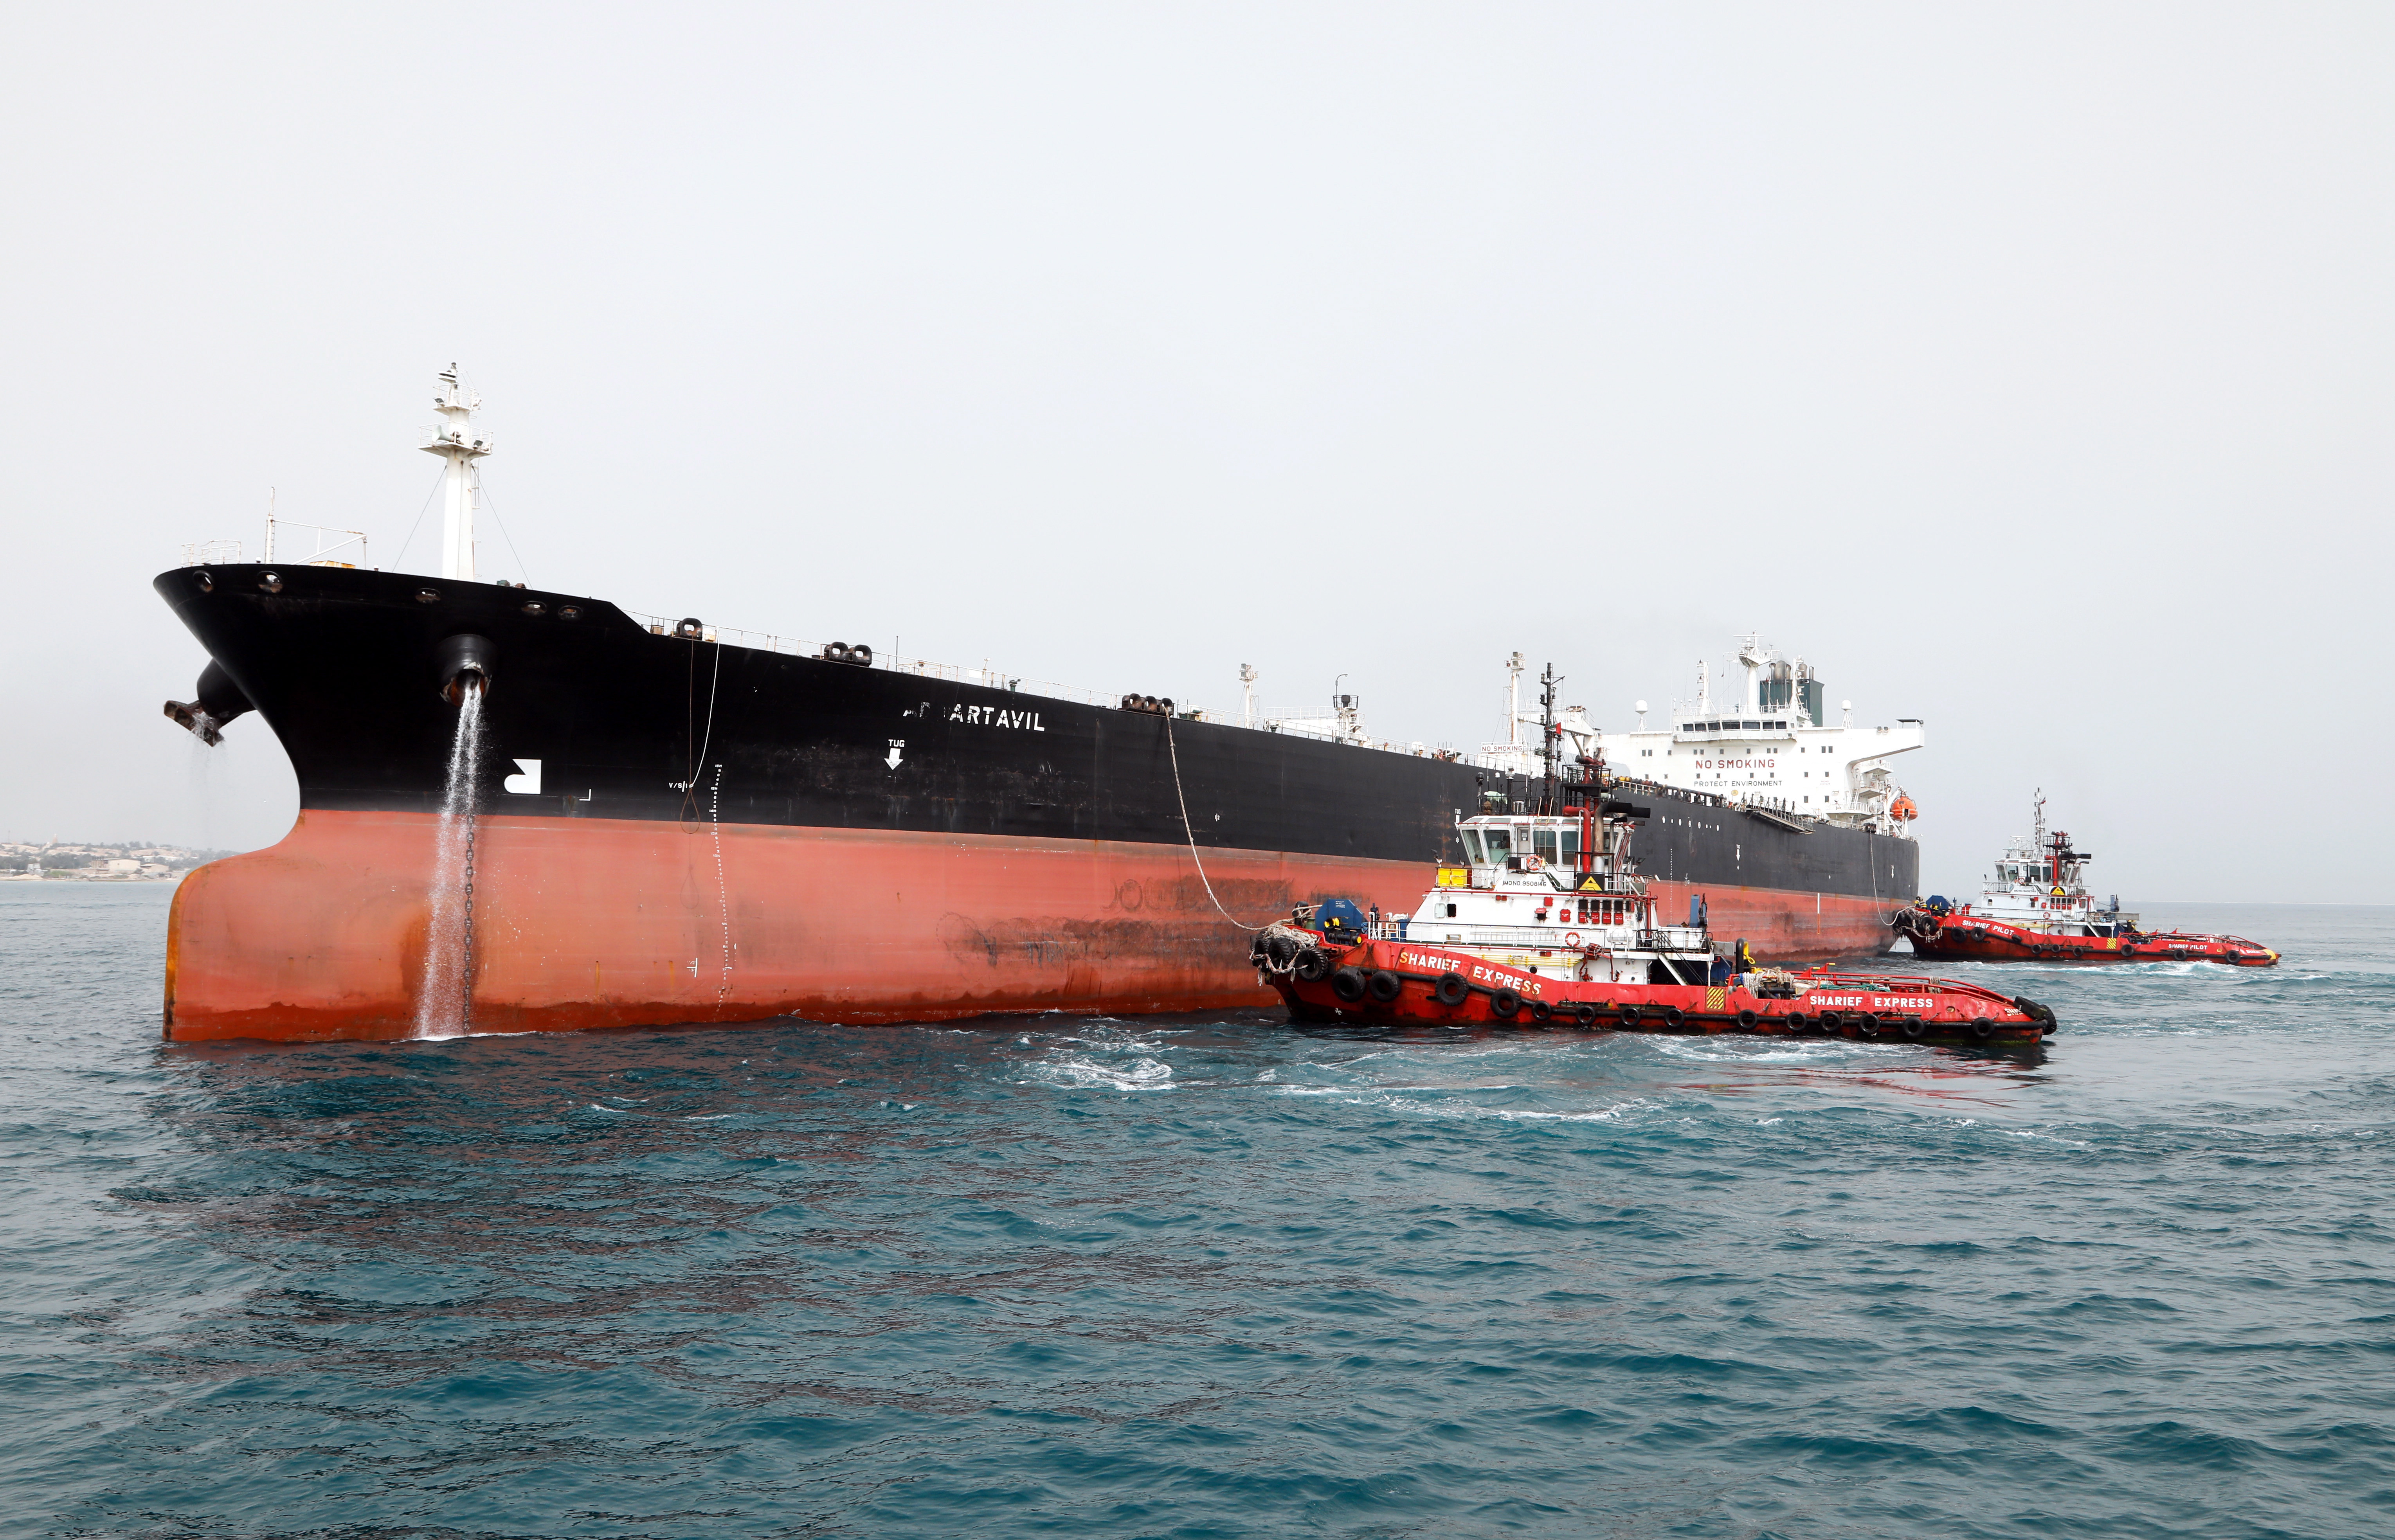 epa07137076 (FILE) Iranian oil tanker 'Artavil Qeshm' moored at the Kharg Island, in Persian Gulf, southern Iran, 12 March 2017 (reissued 02 November 2018). The US government on 02 November 2018 announced it will reimpose sanctions that had been waived under the Iran nuclear deal. Five nations including the United States worked out a deal with Iran in 2015 that withdrew sanctions.  EPA/ABEDIN TAHERKENAREH